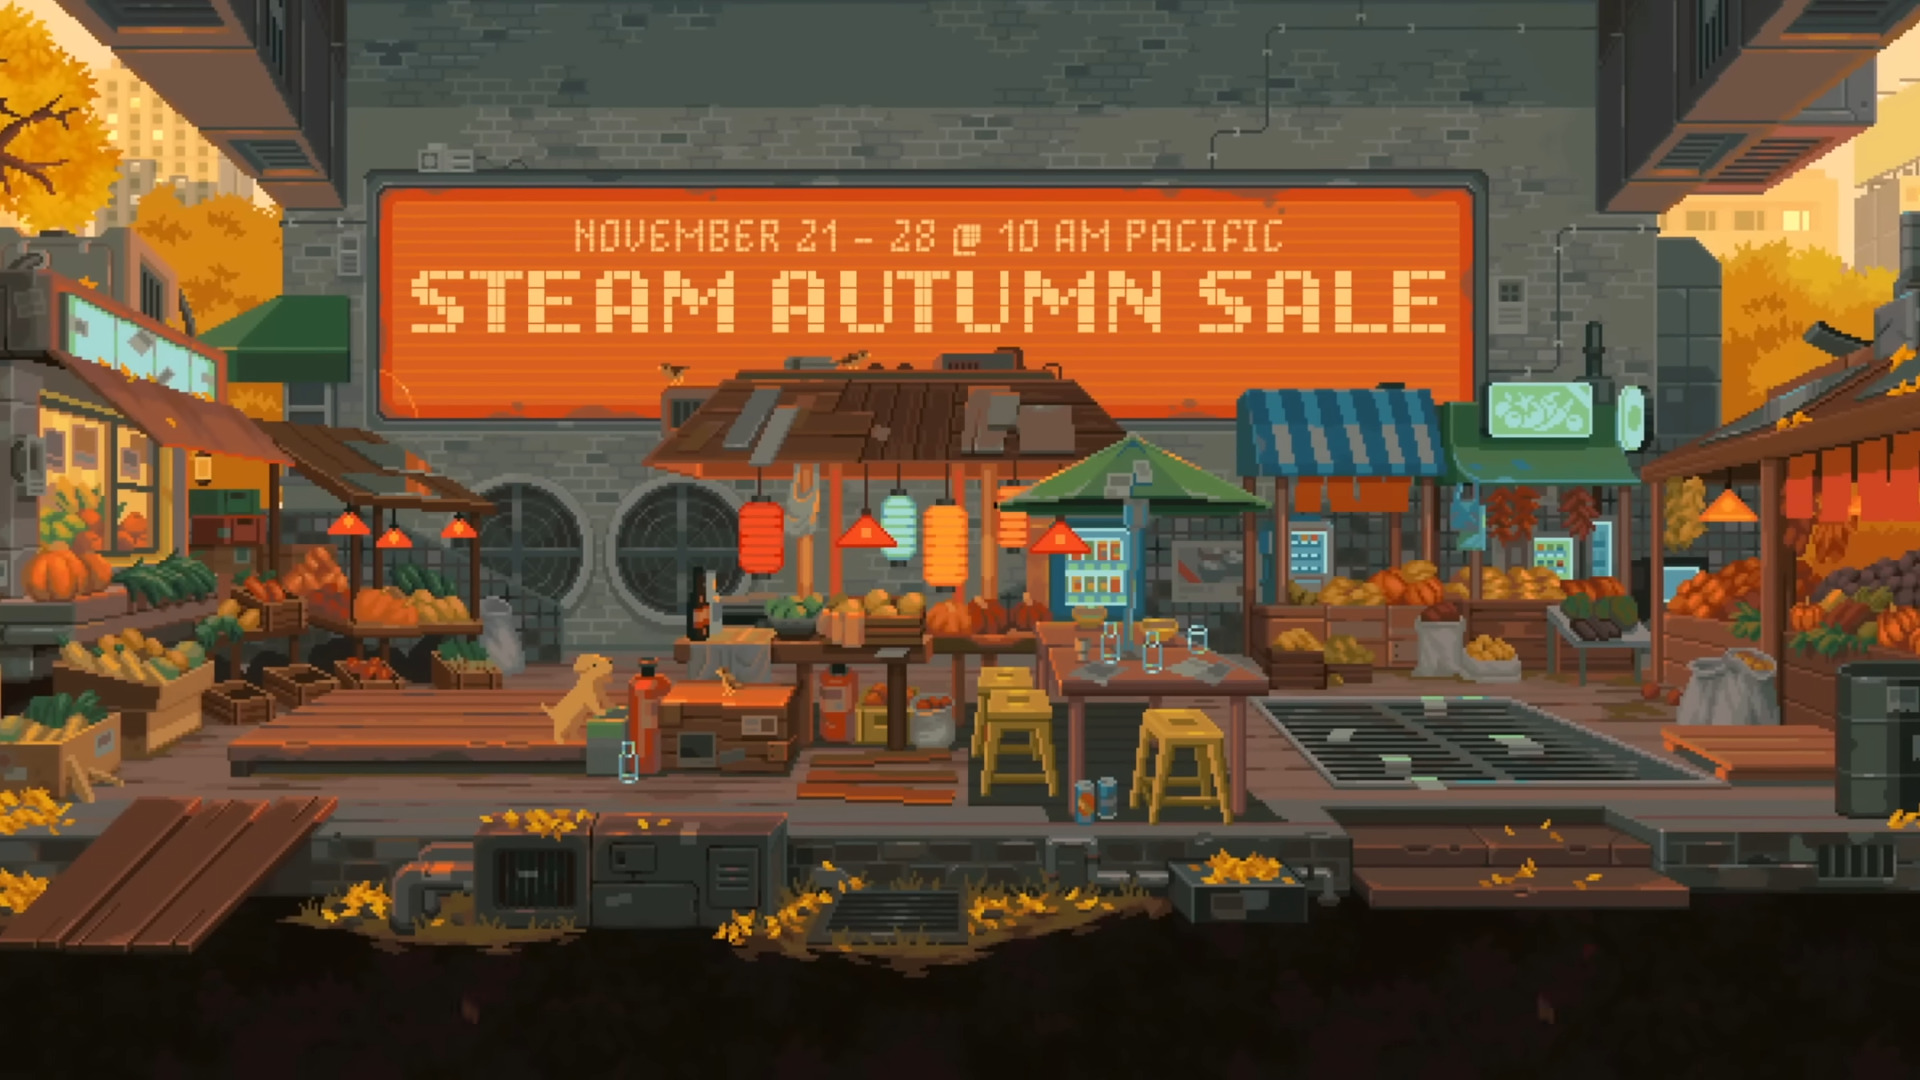 Steam Autumn Sale Announced for November 21st to 28th